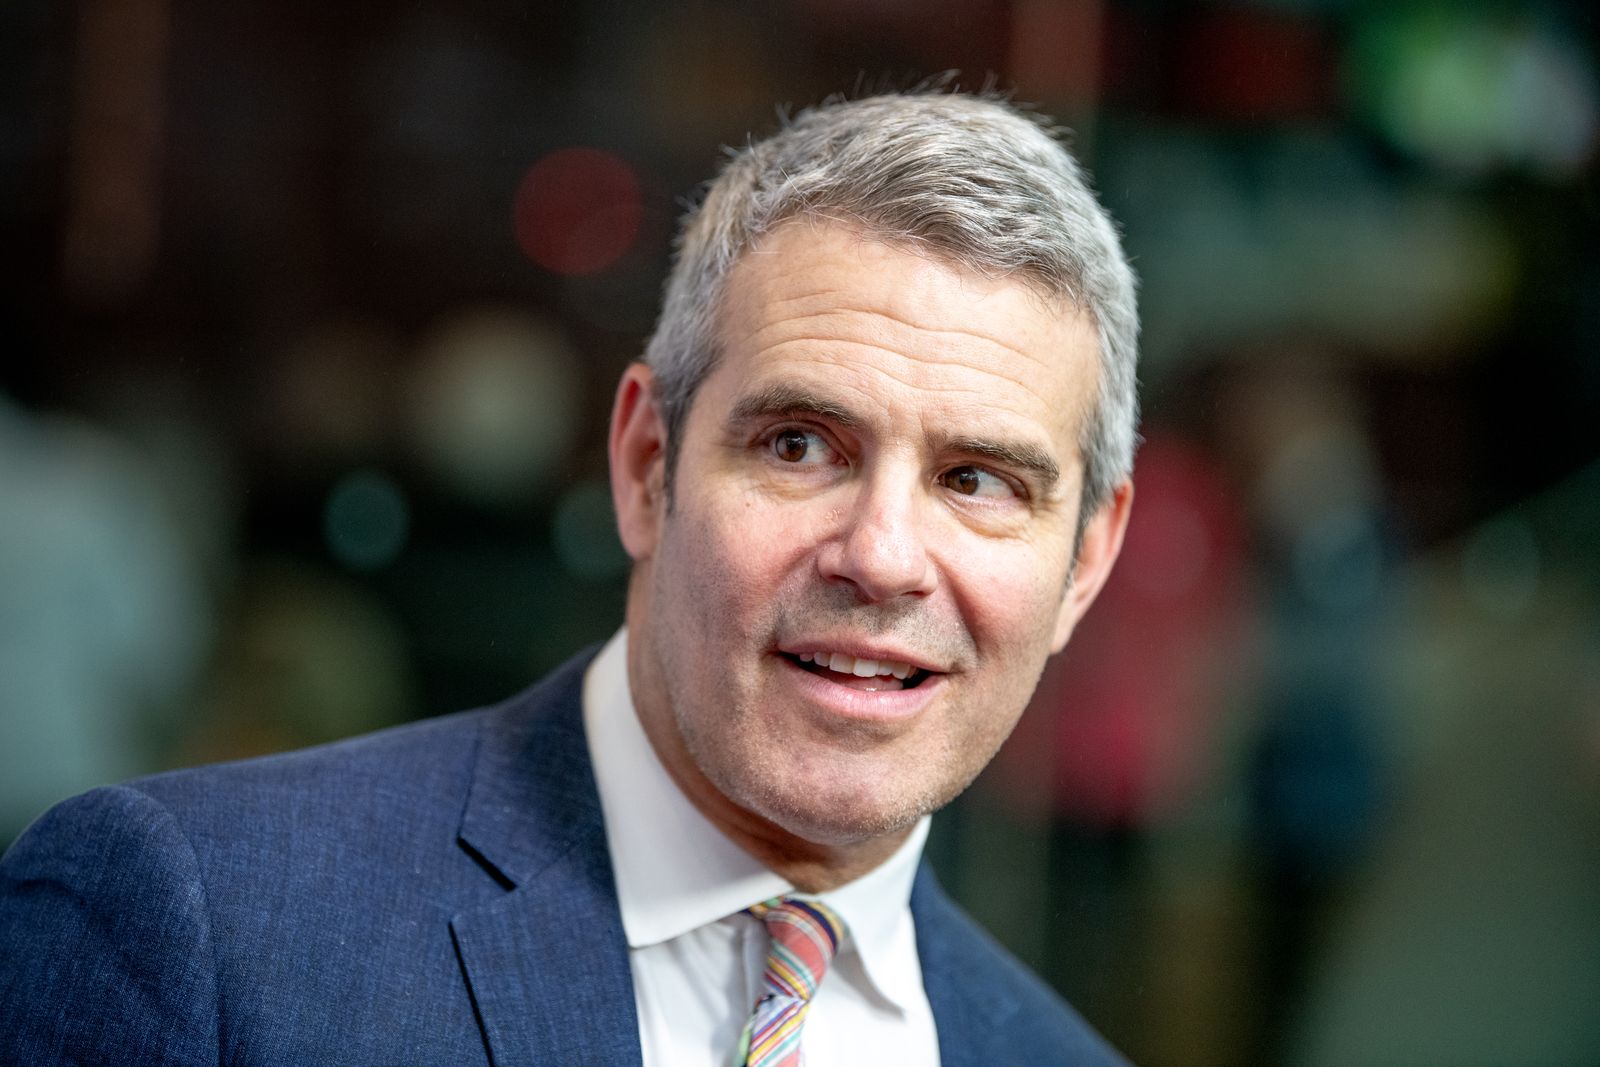 Andy Cohen at the American Songbook Gala held at the Lincoln Center on June 19, 2019, in New York City | Photo: Roy Rochlin/Getty Images